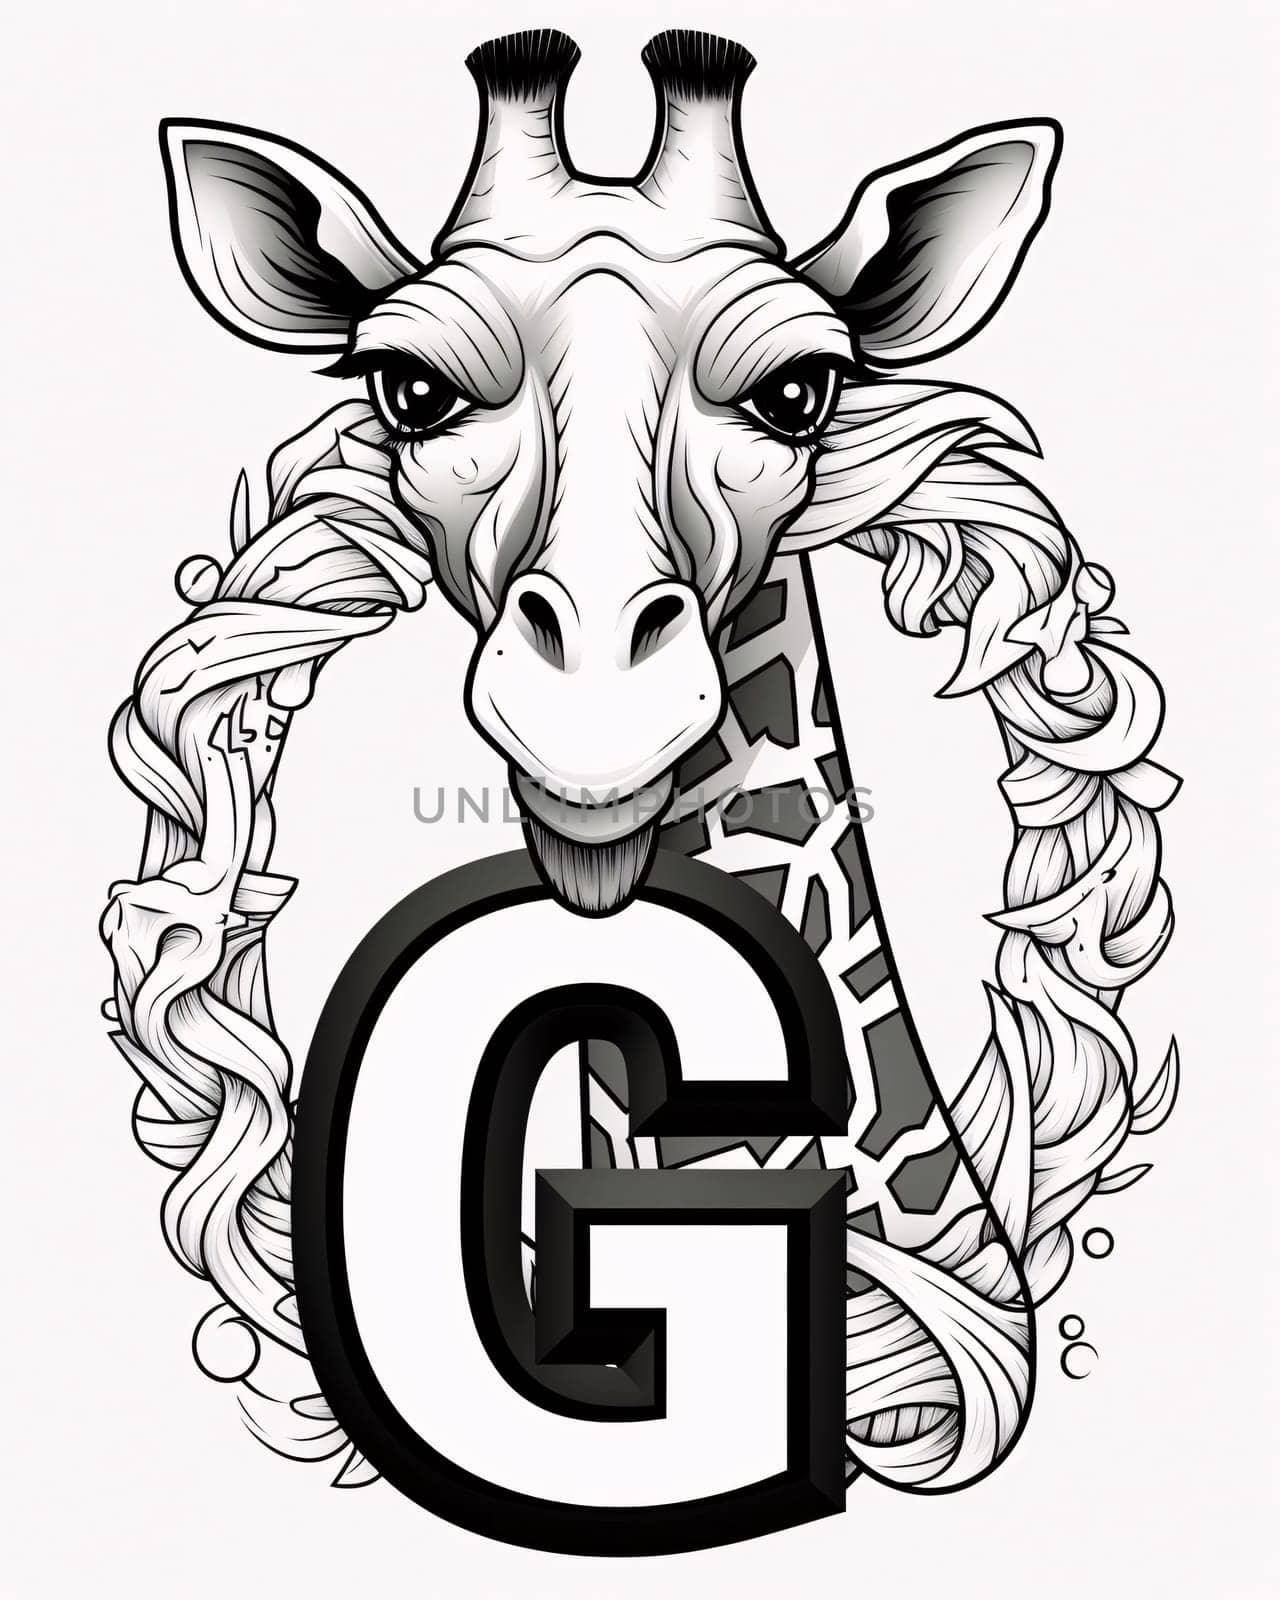 Giraffe head with letter G in black and white illustration. by ThemesS